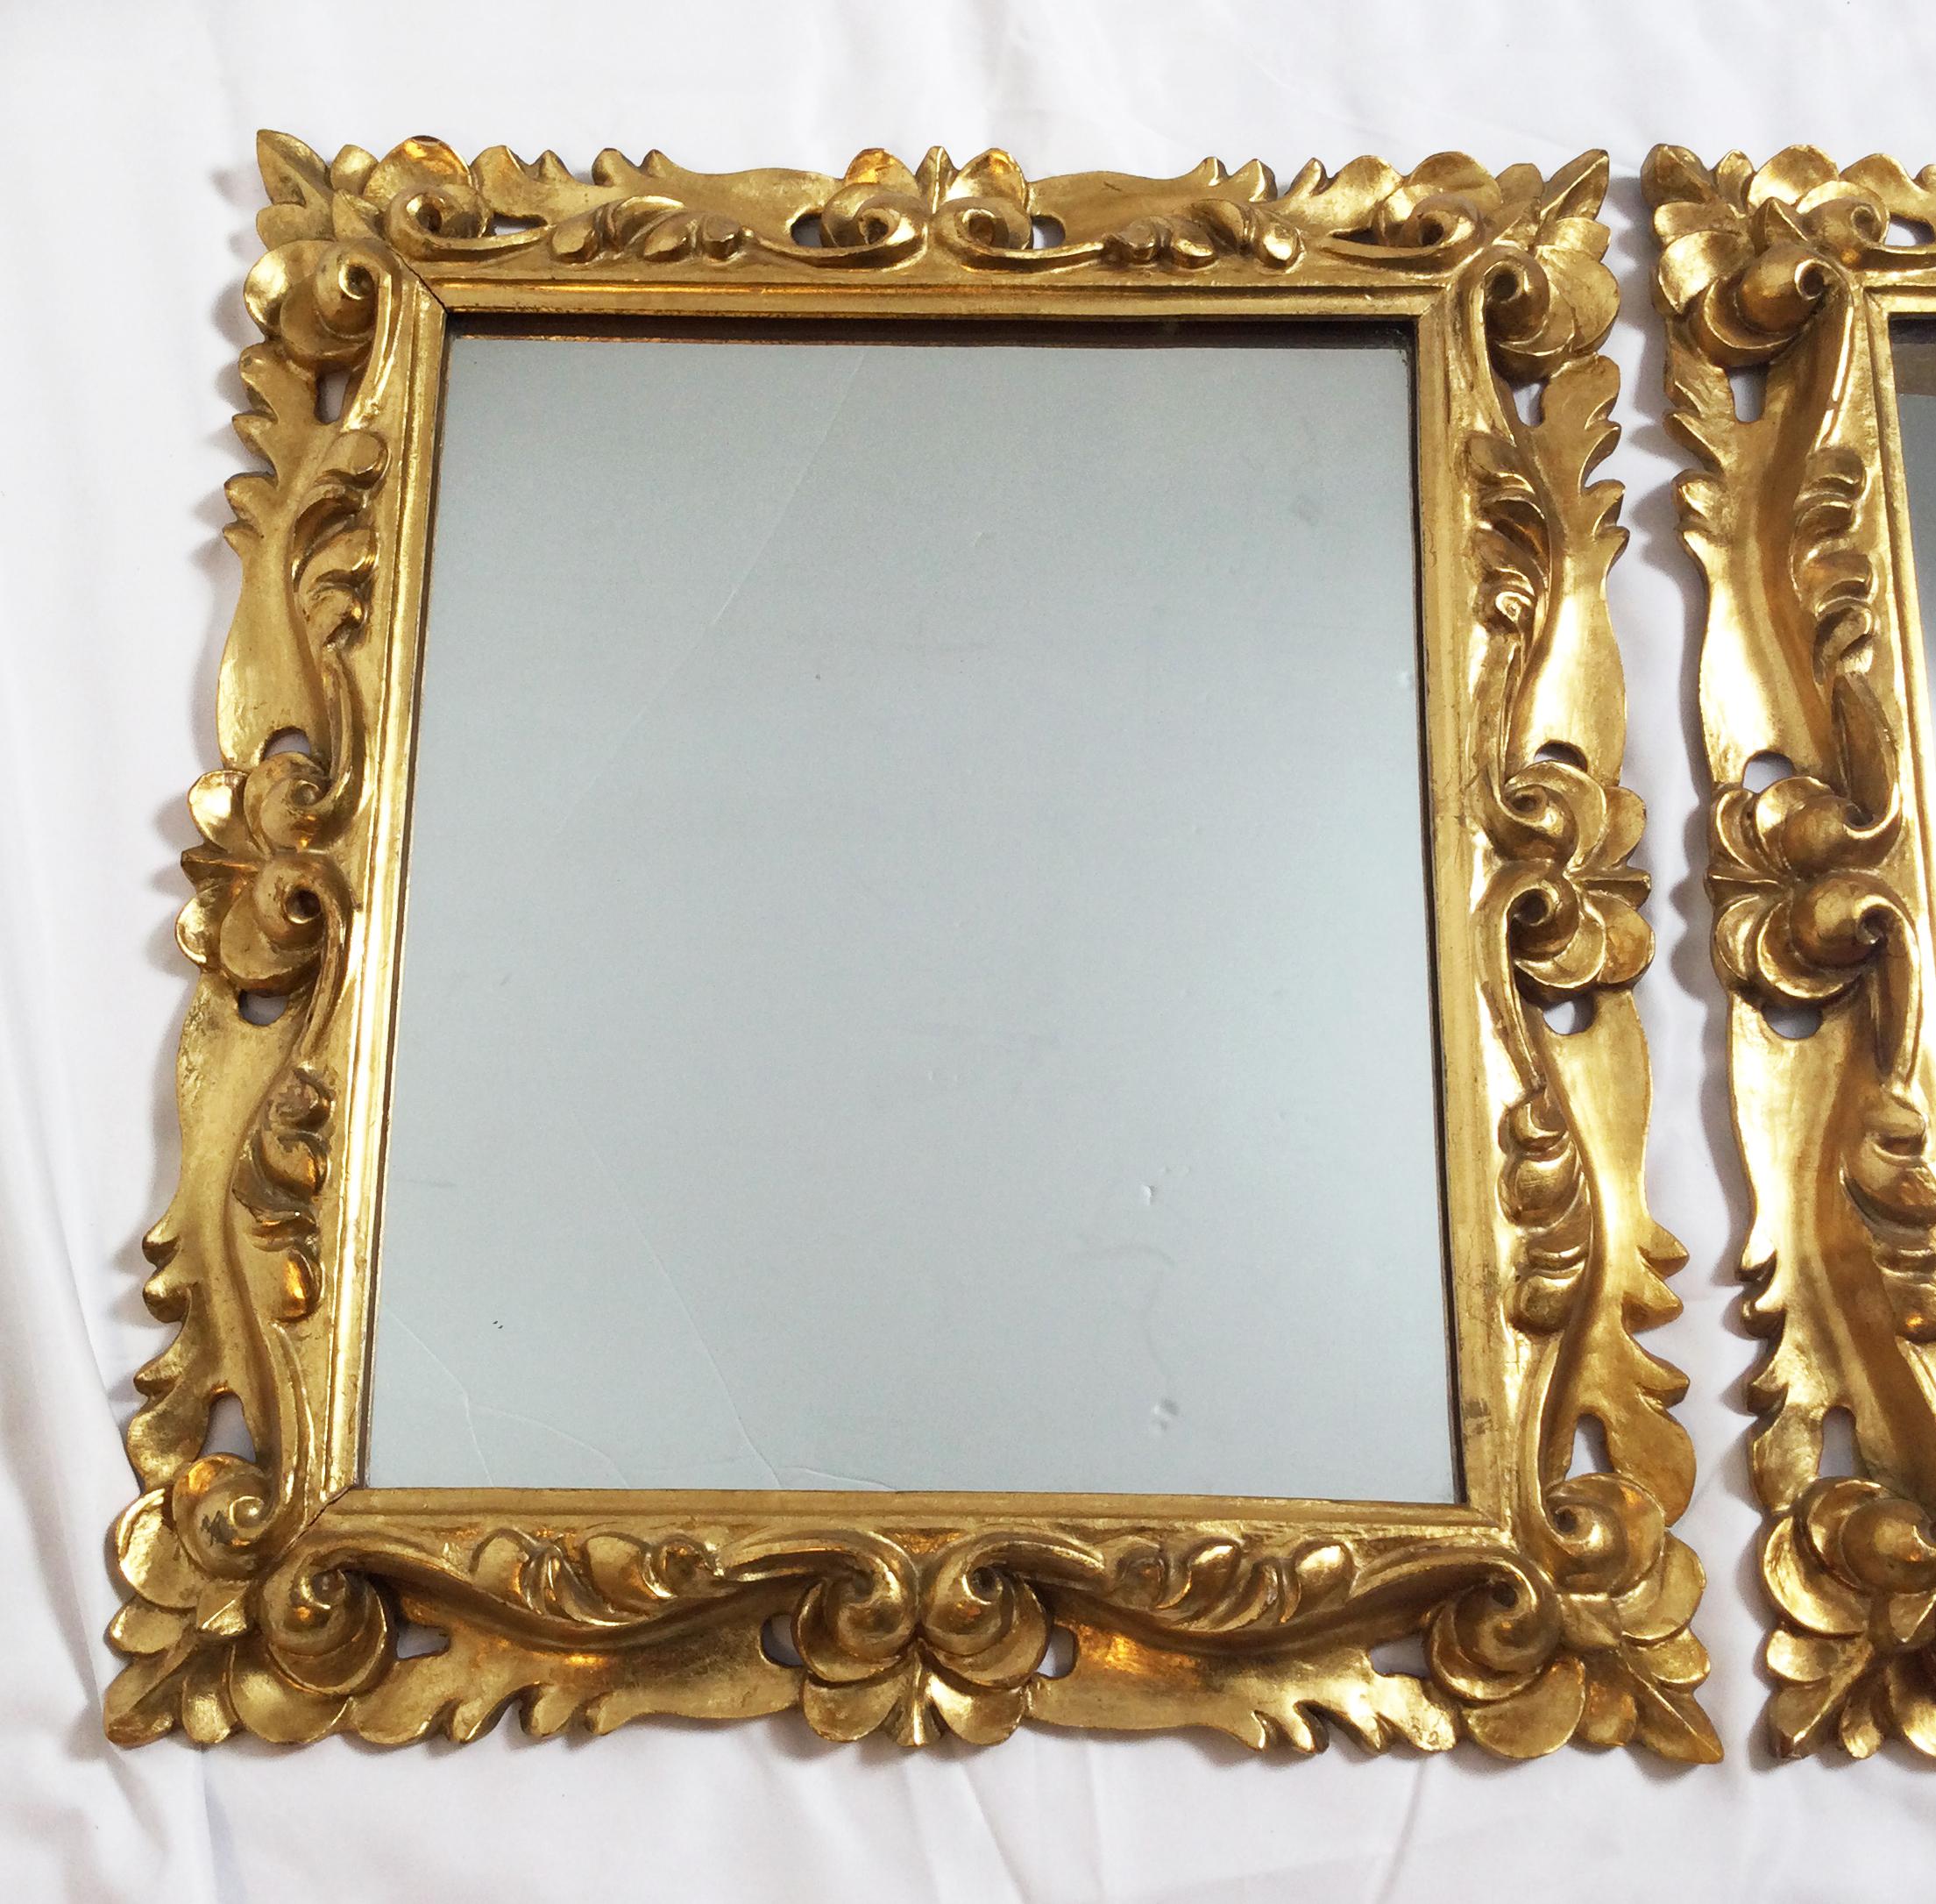 Early 20th century pair of Italian gold gilt carved wood mirrors, nice smaller size that is great for bathroom or hallway.
Dimensions: 14